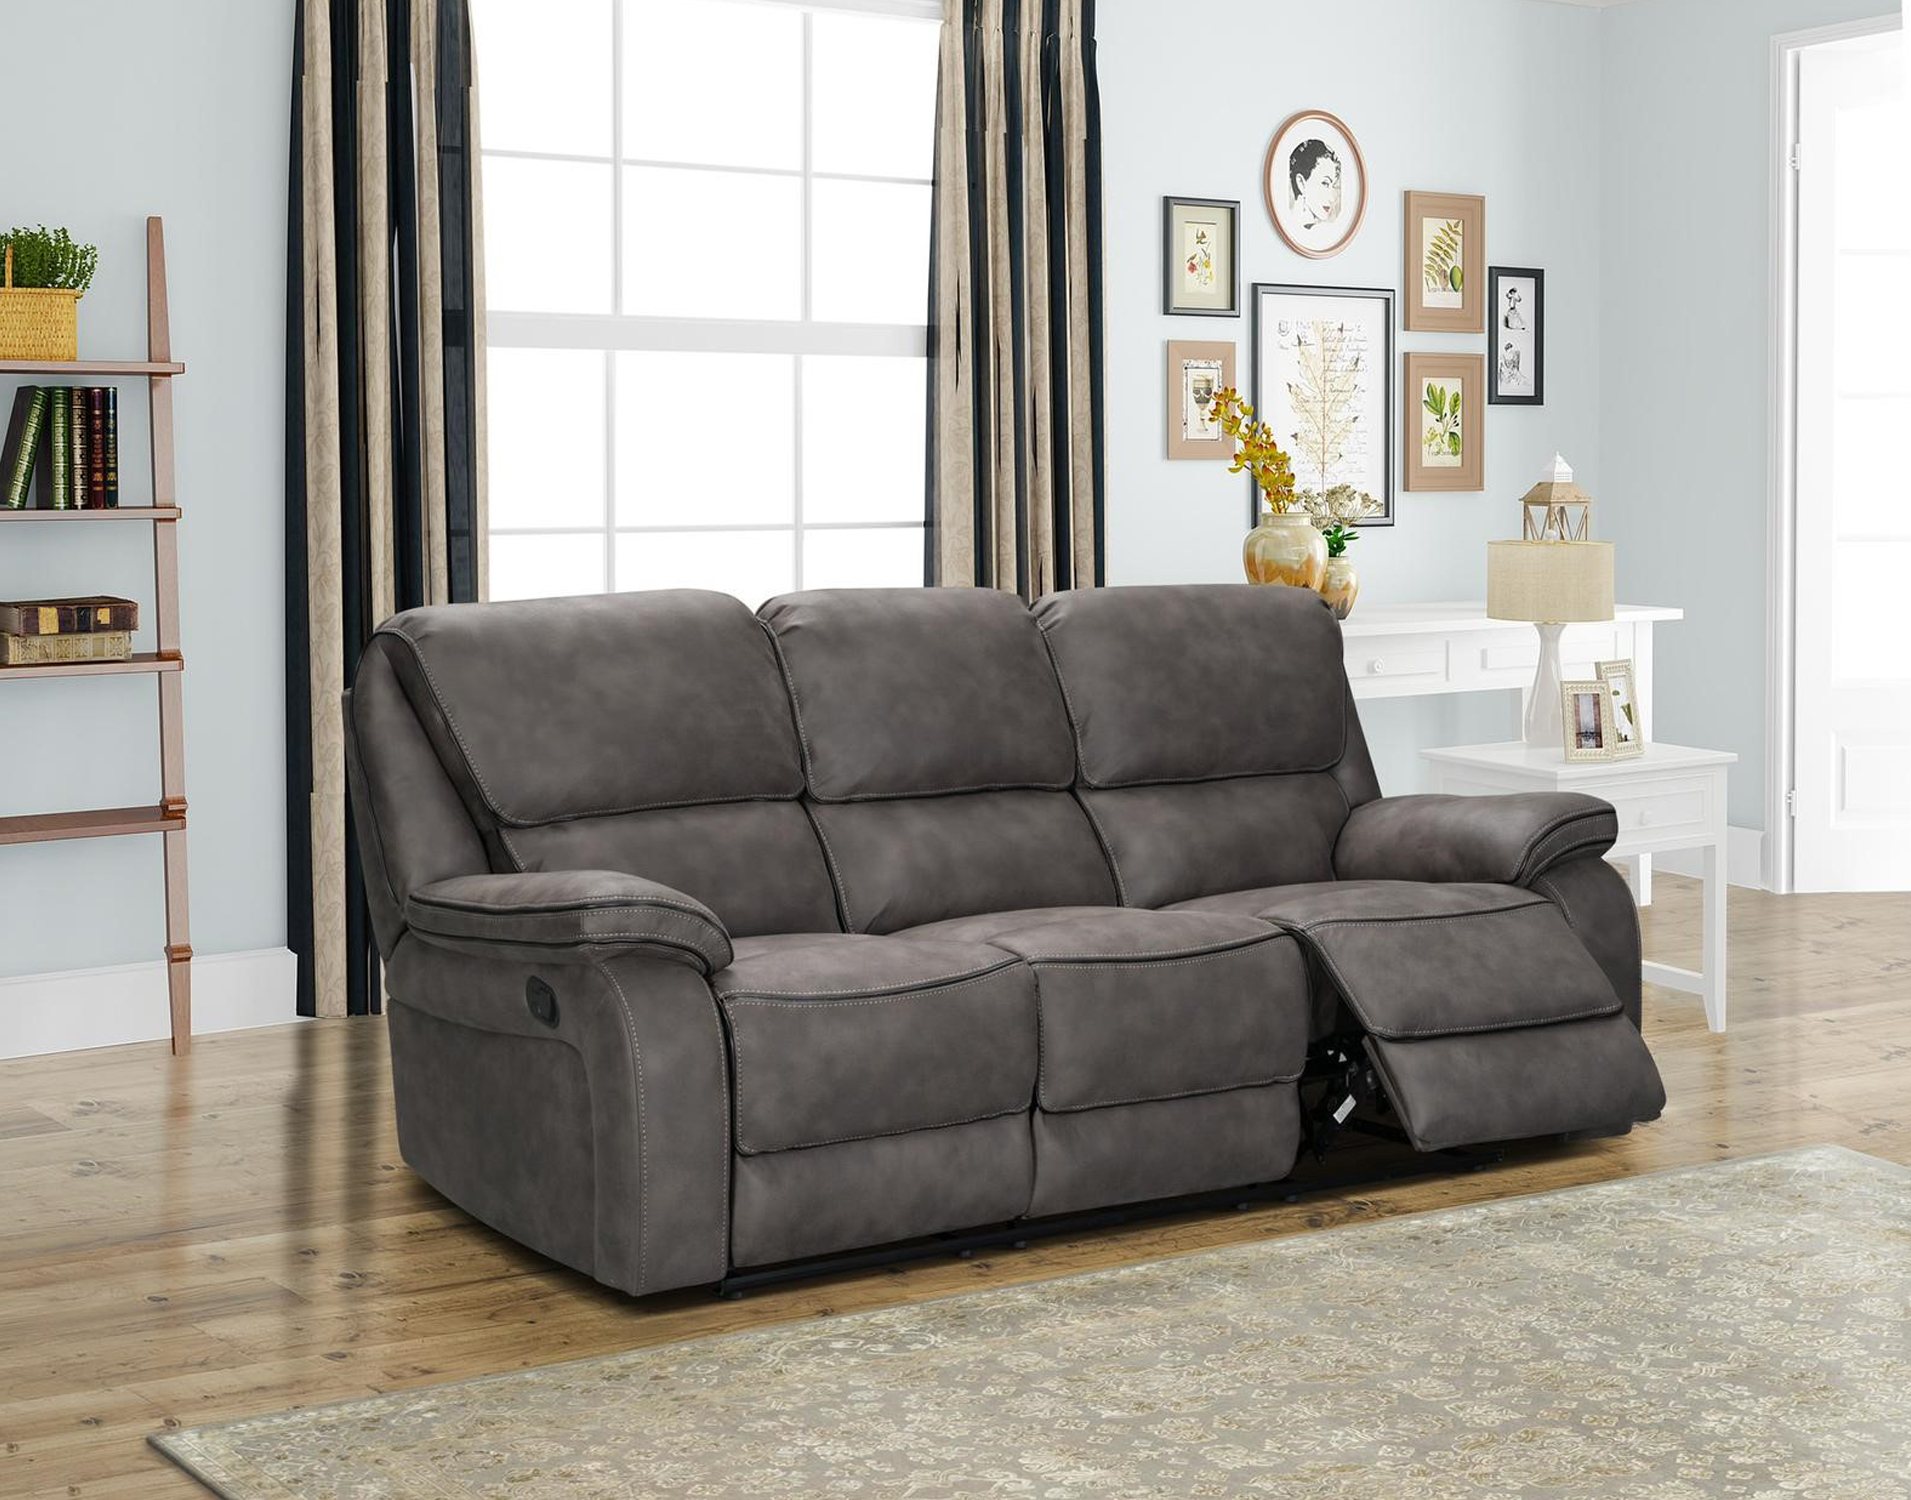 Monaco 3 & 2 Seater Manual Recliner Sofa Package Deal - Furniture World